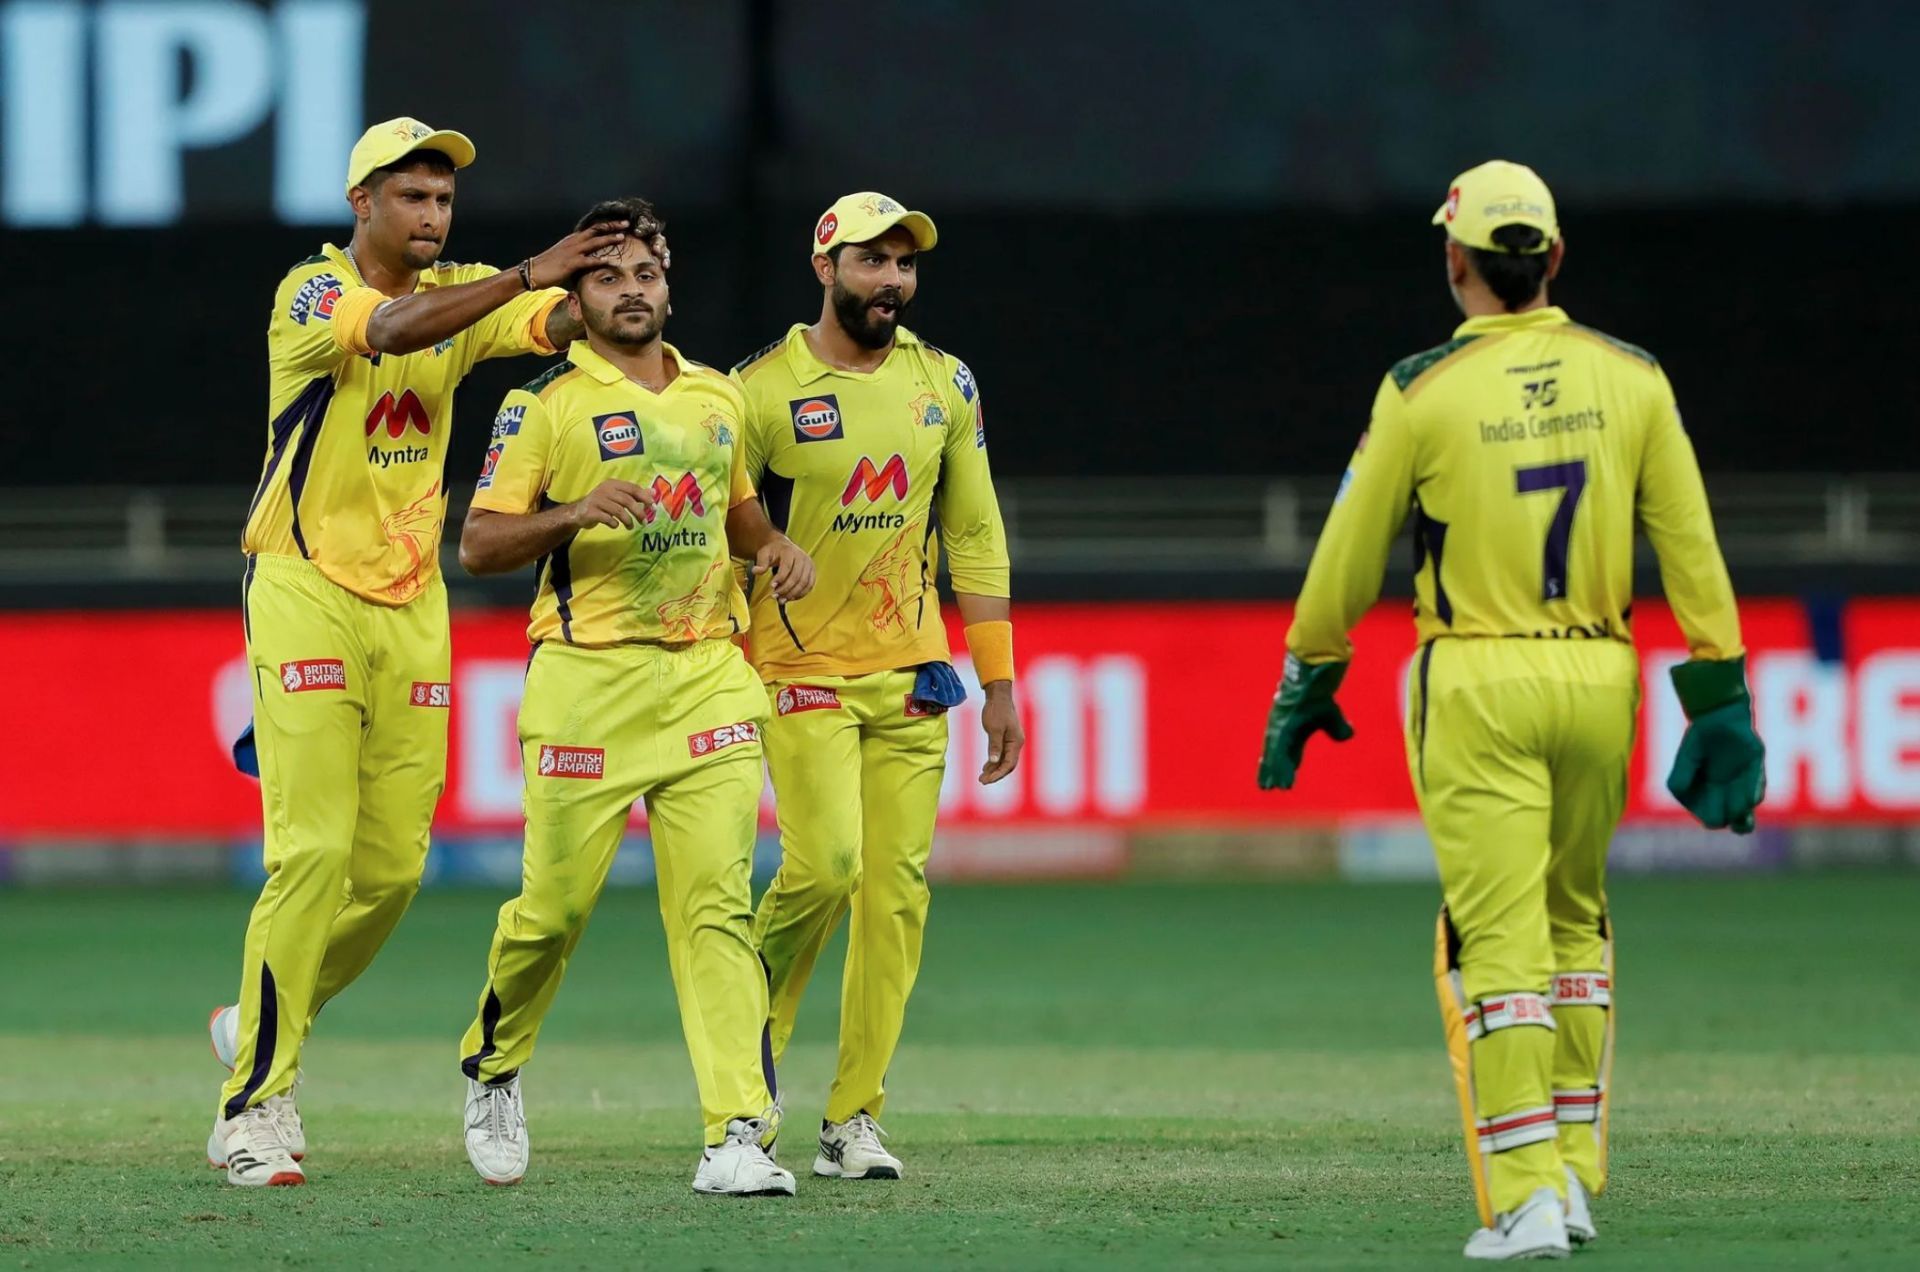 The Chennai Super Kings will be looking to add another IPL title to their collection (Image: IPL)